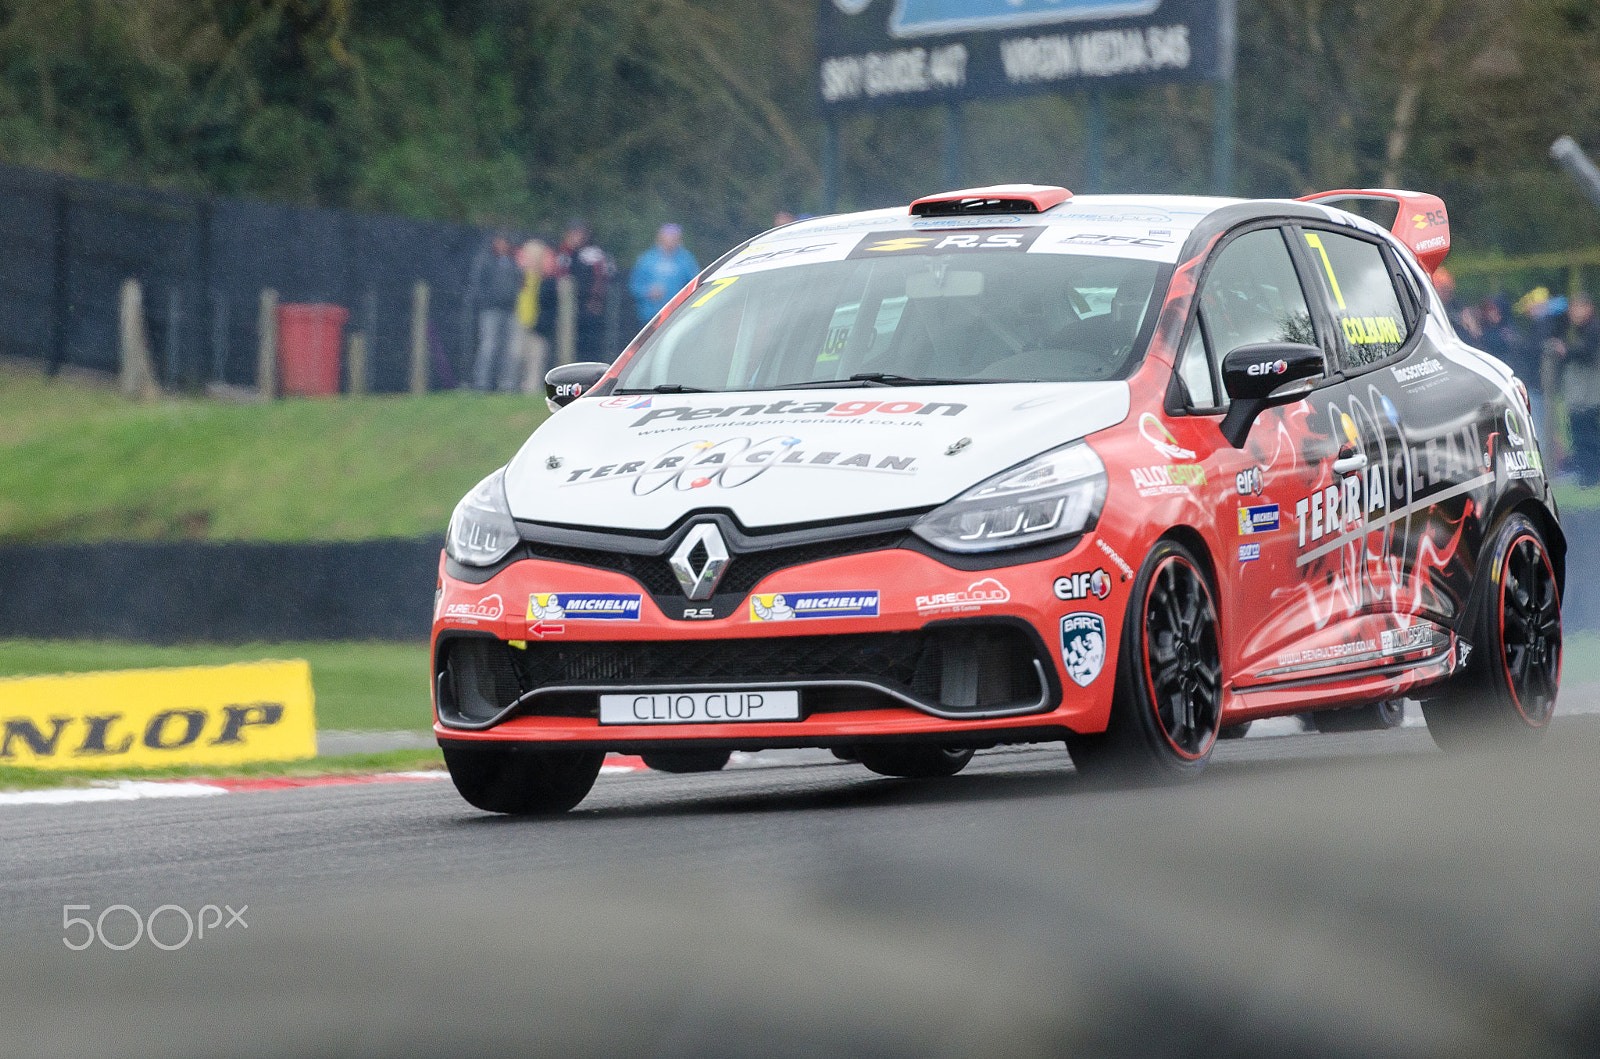 Nikon D7000 sample photo. Today at brands hatch - renault clio cup photography